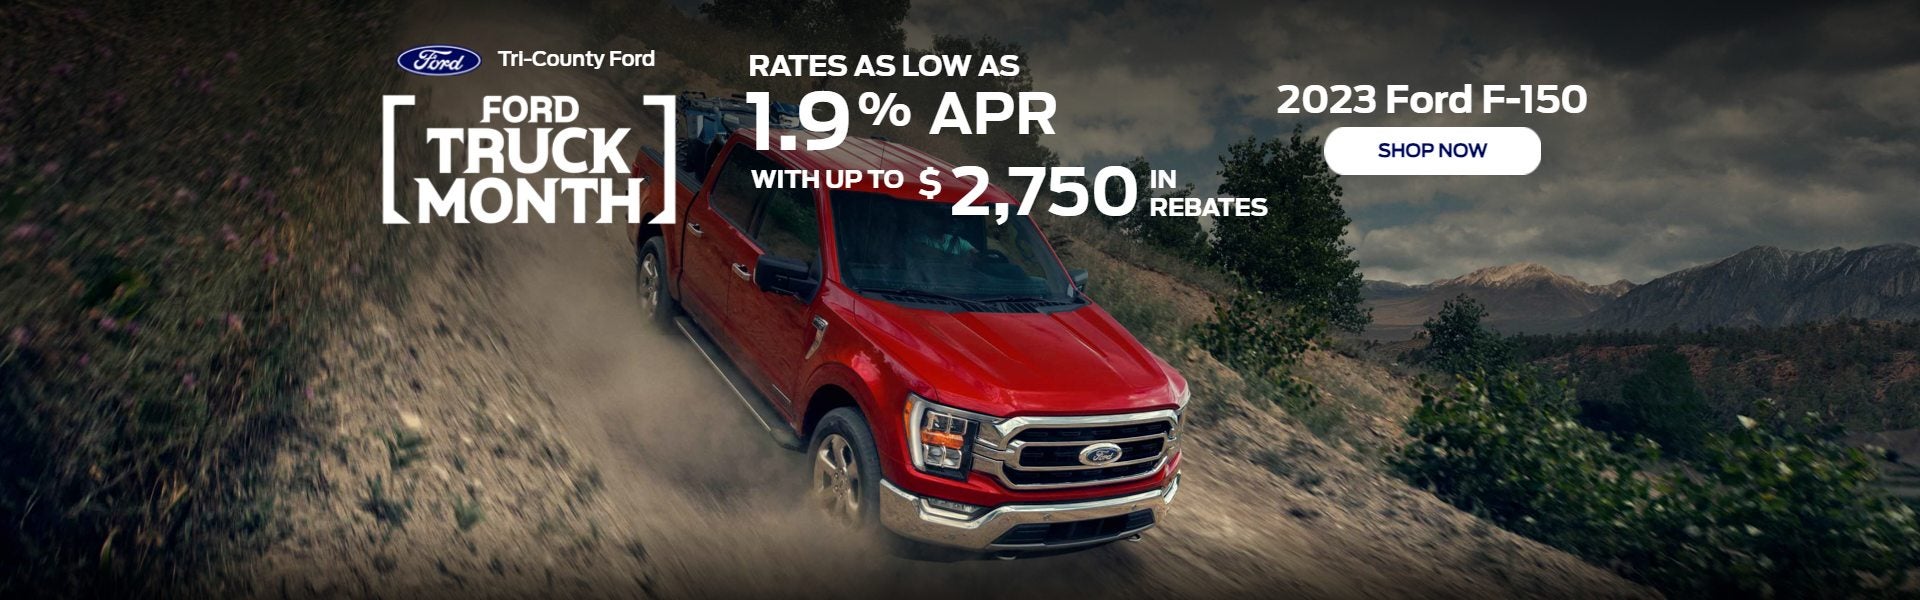 As low as 1.9% financing on 2023 F-150